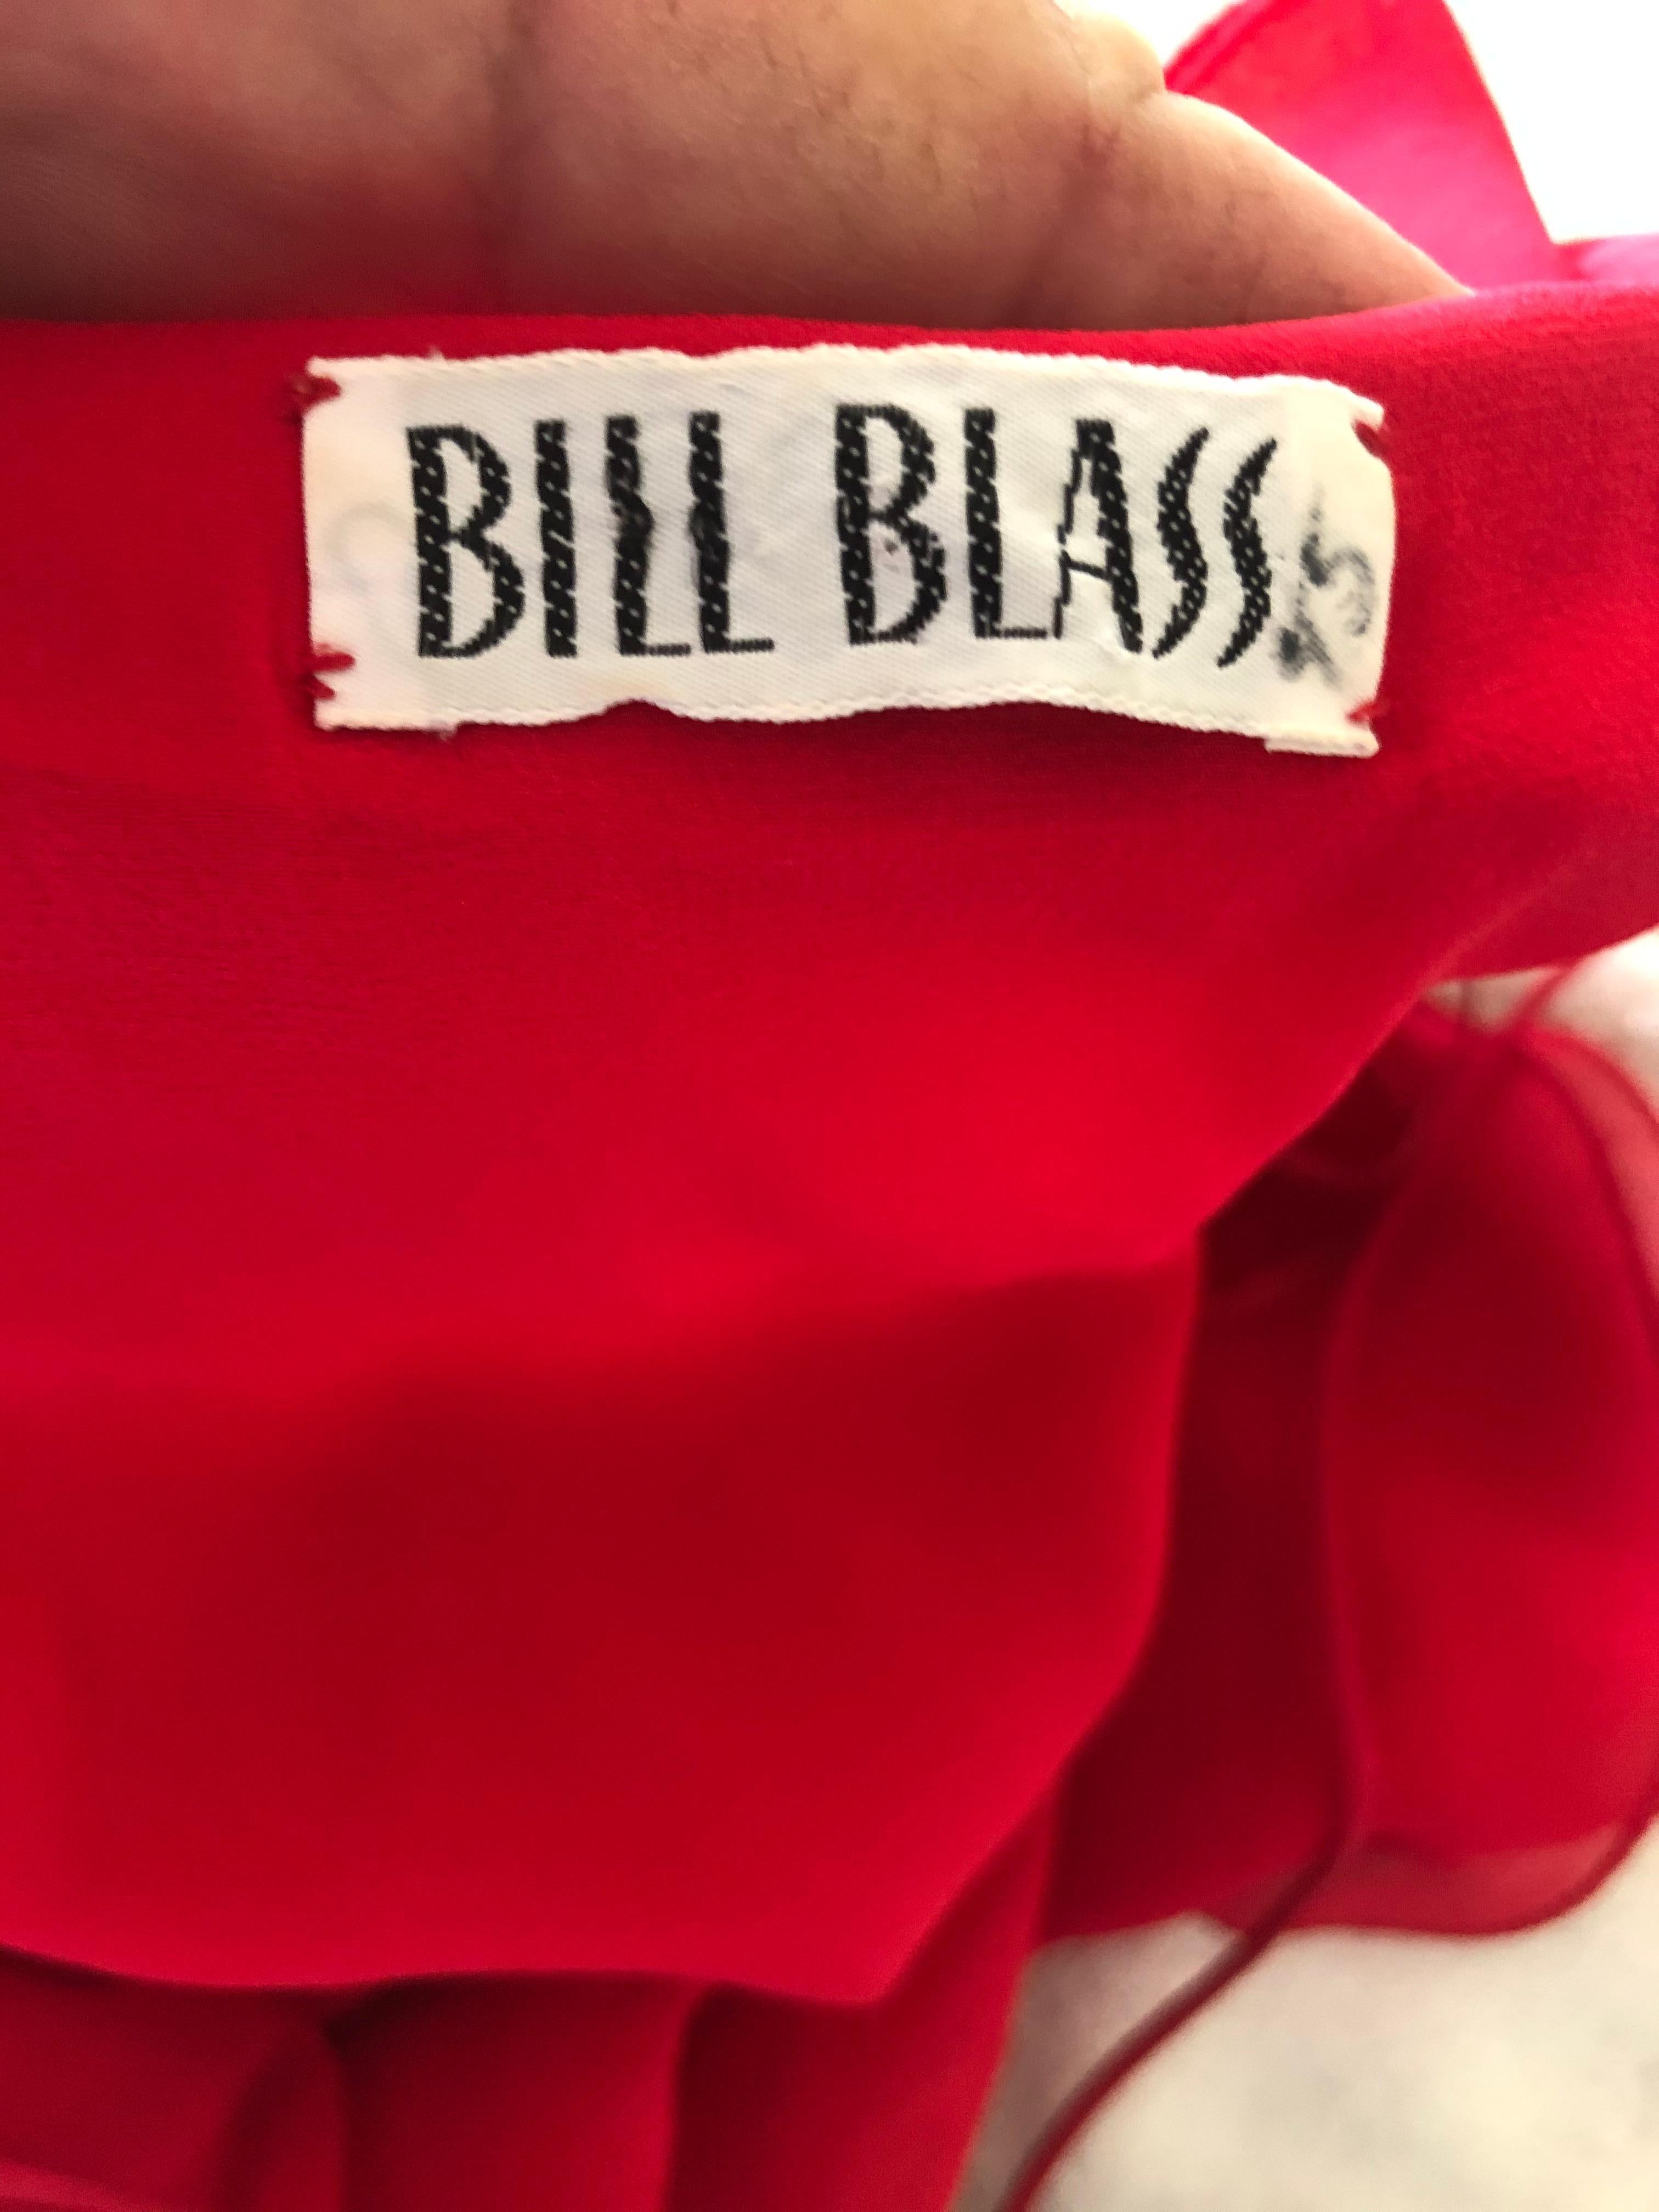 Bill Blass Sexy Vintage 1970's Ruffled Red Dress
Marked size 8, more like a 6 in today's size
 Bust 36'
Waist 34